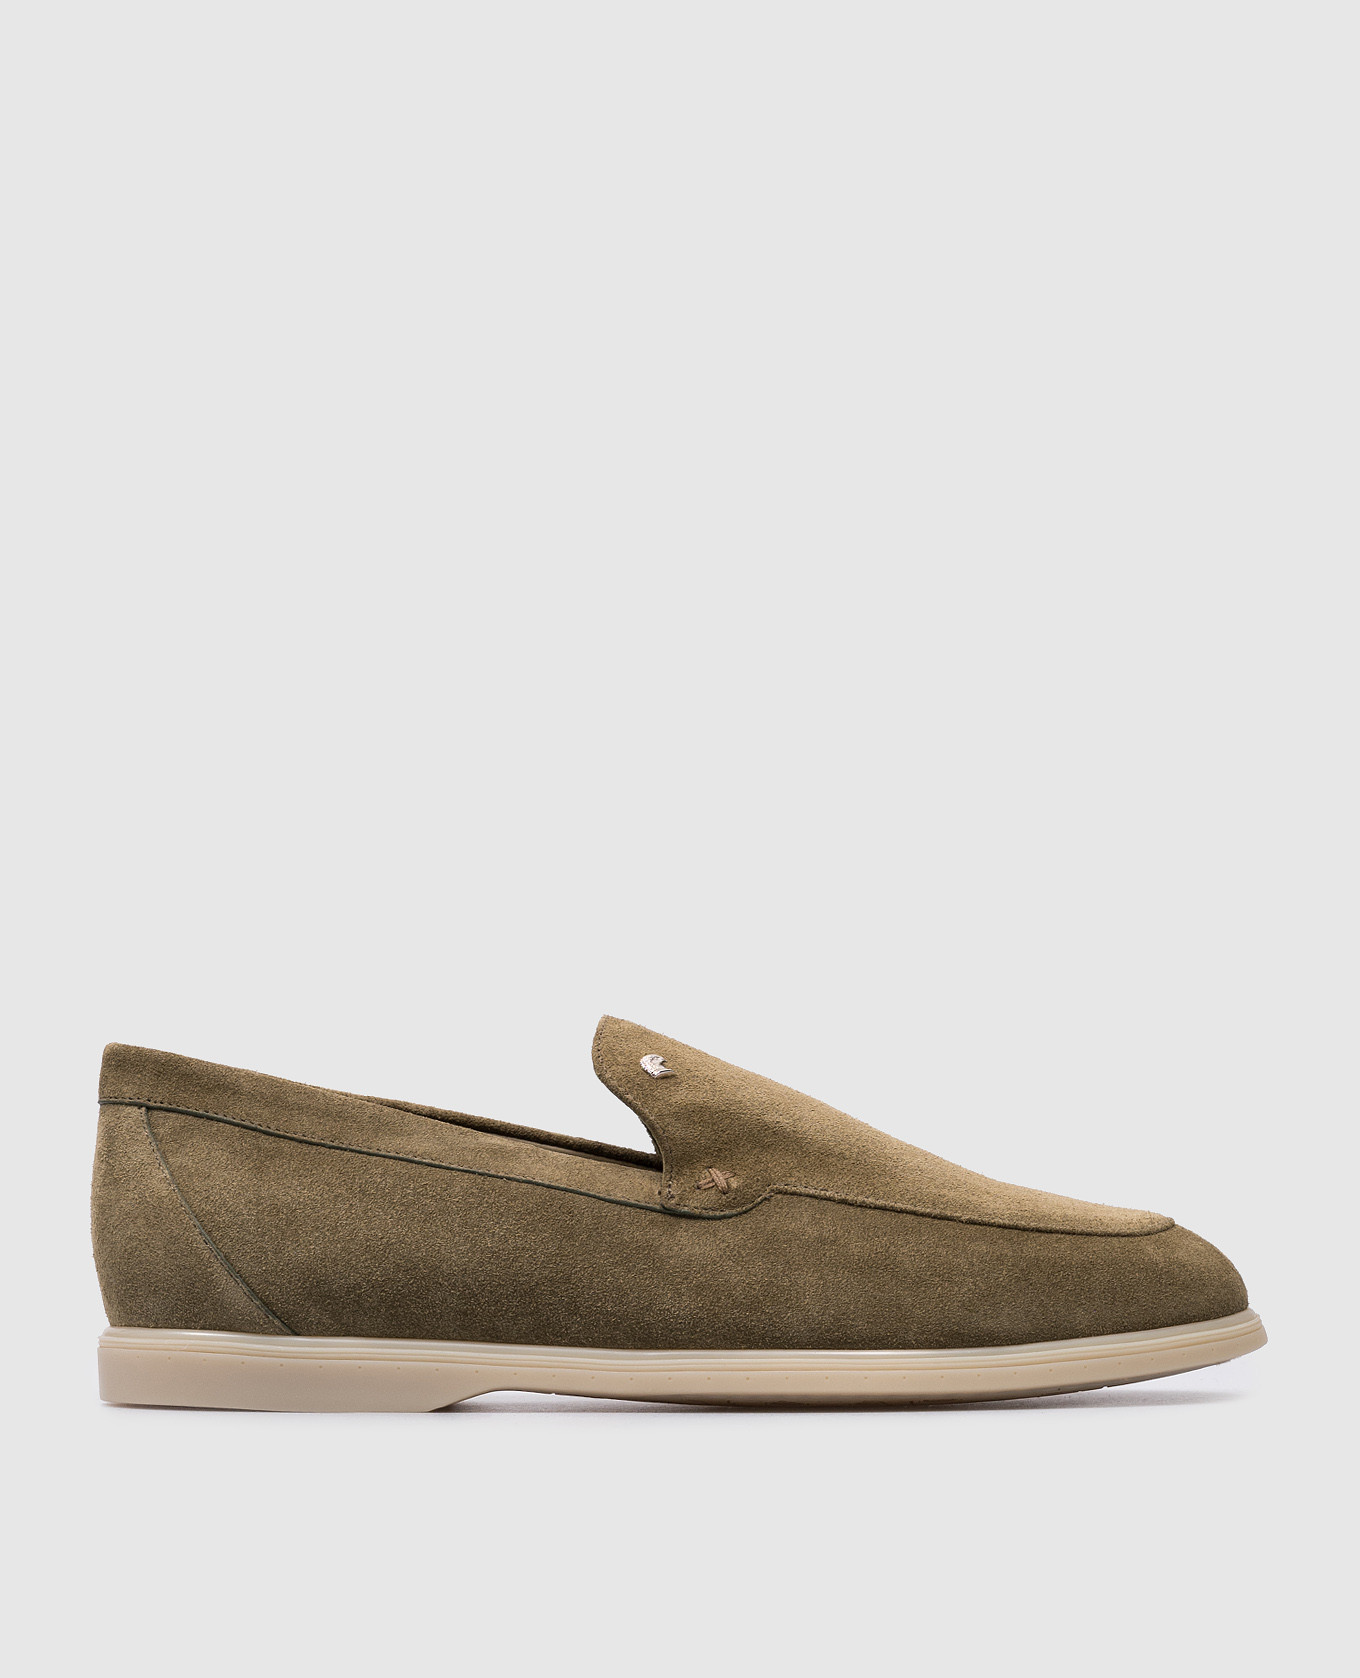 Green suede loafers with metallic logo patch